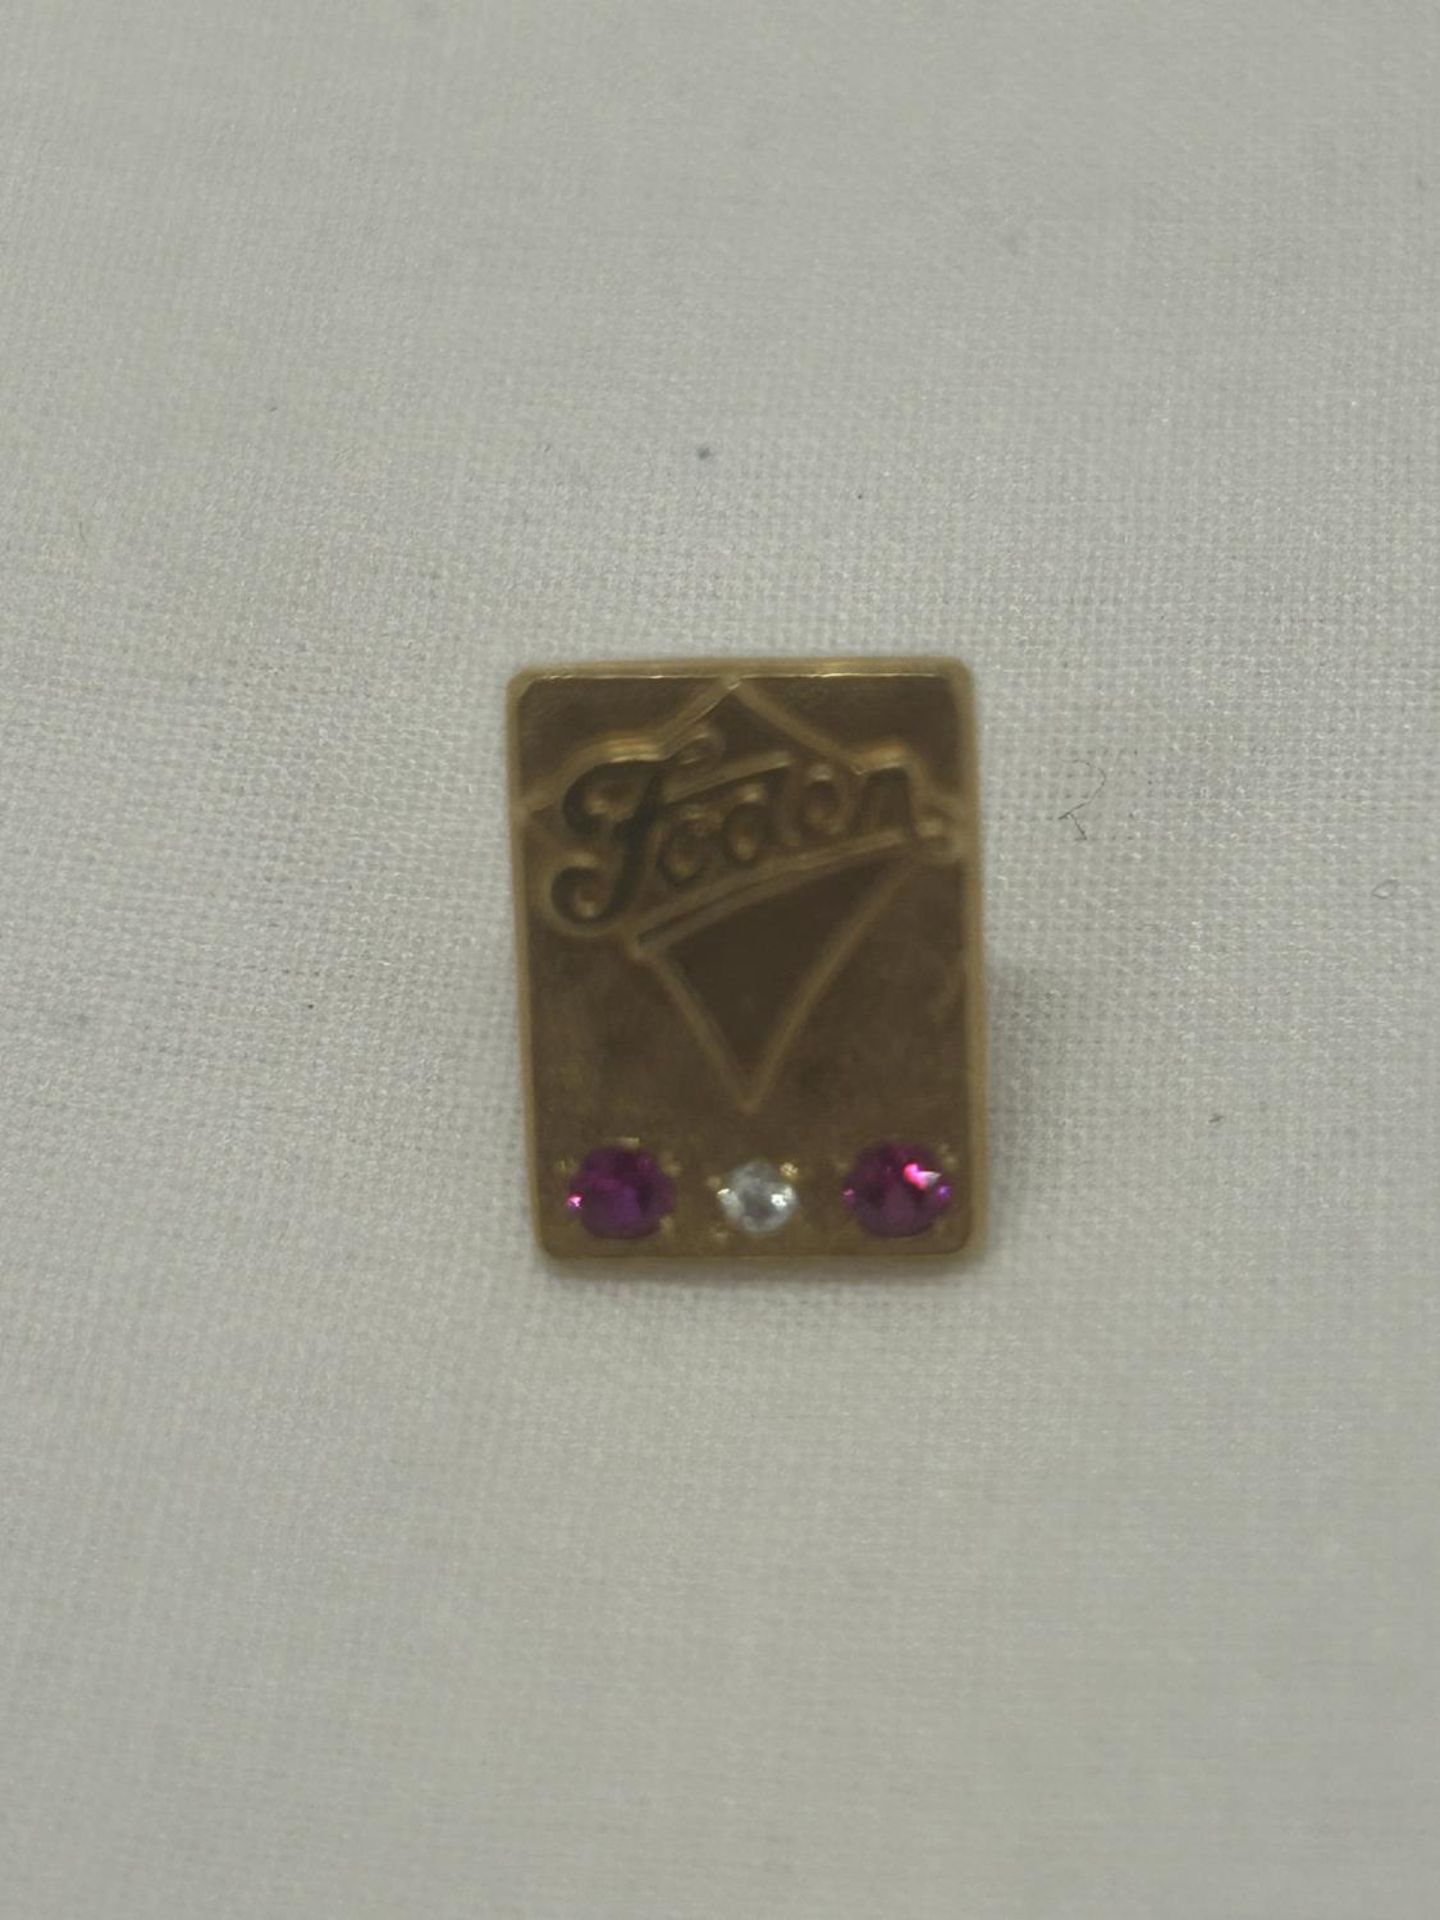 A HALLMARKED 9CT GOLD DIAMOND AND RUBY 'FODEN' PIN BADGE GROSS WEIGHT 4.84G - Image 3 of 4